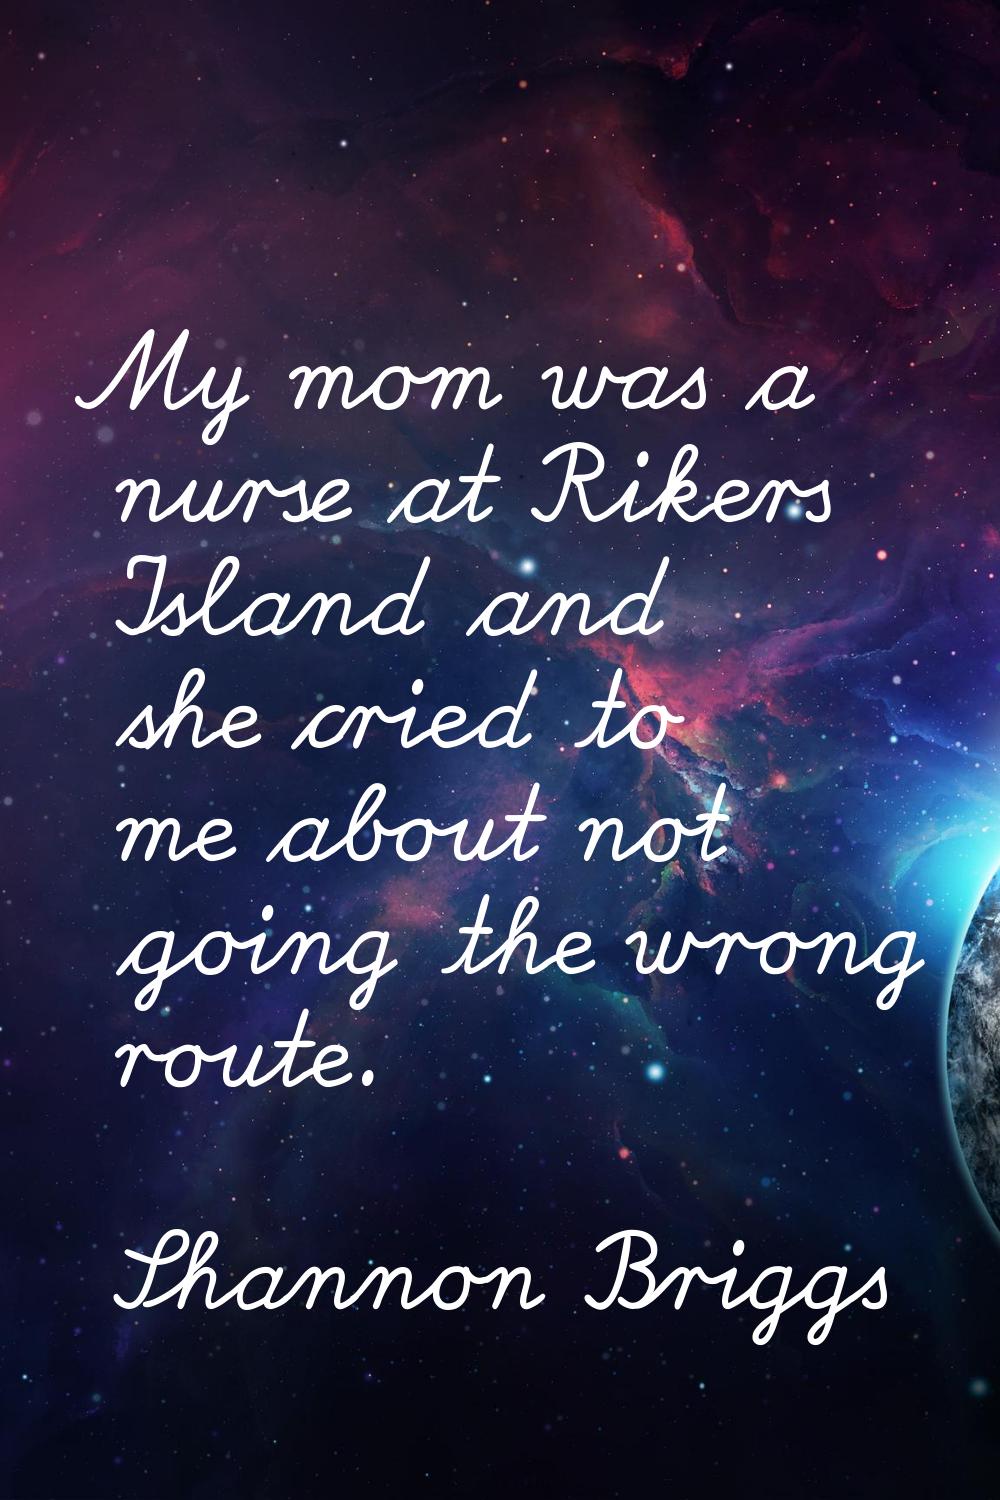 My mom was a nurse at Rikers Island and she cried to me about not going the wrong route.